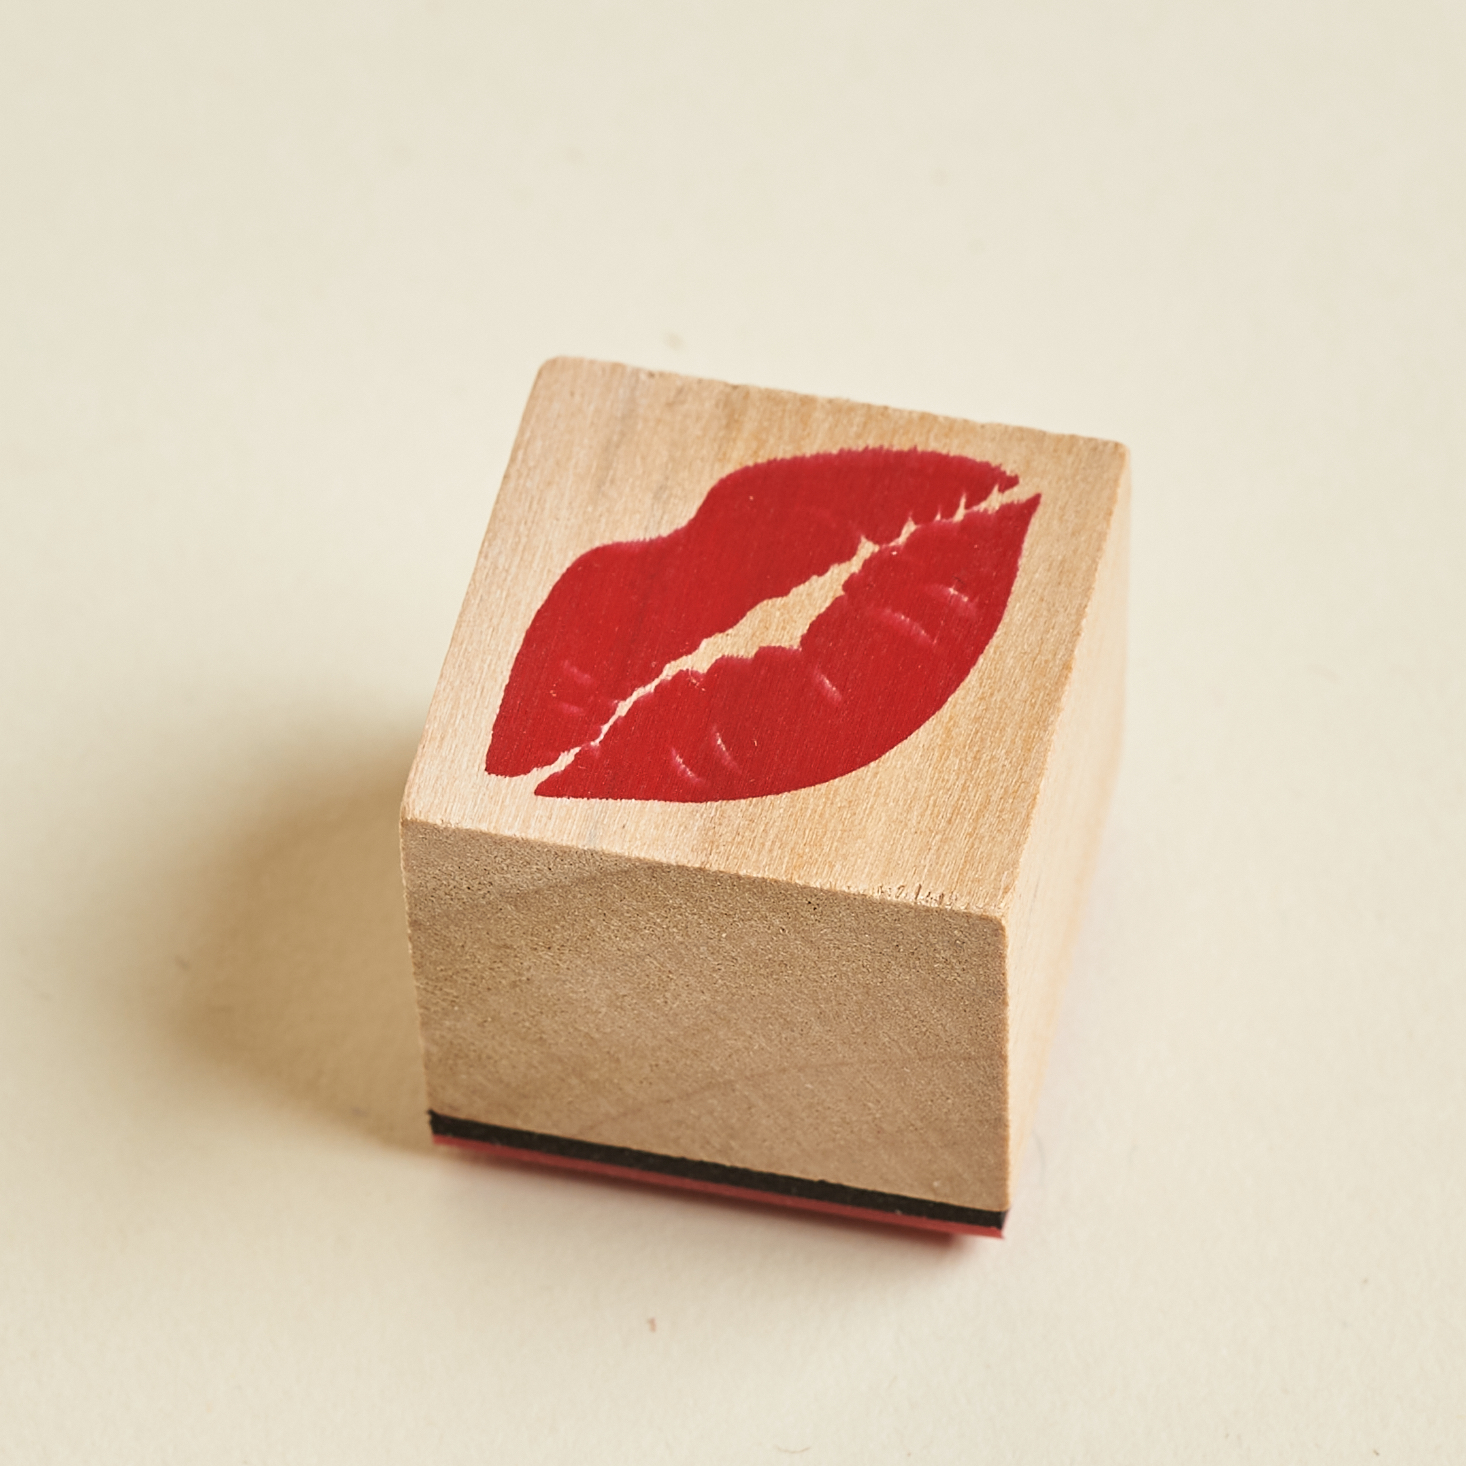 Kiss rubber stamp from Postmarkd Studio February 2021